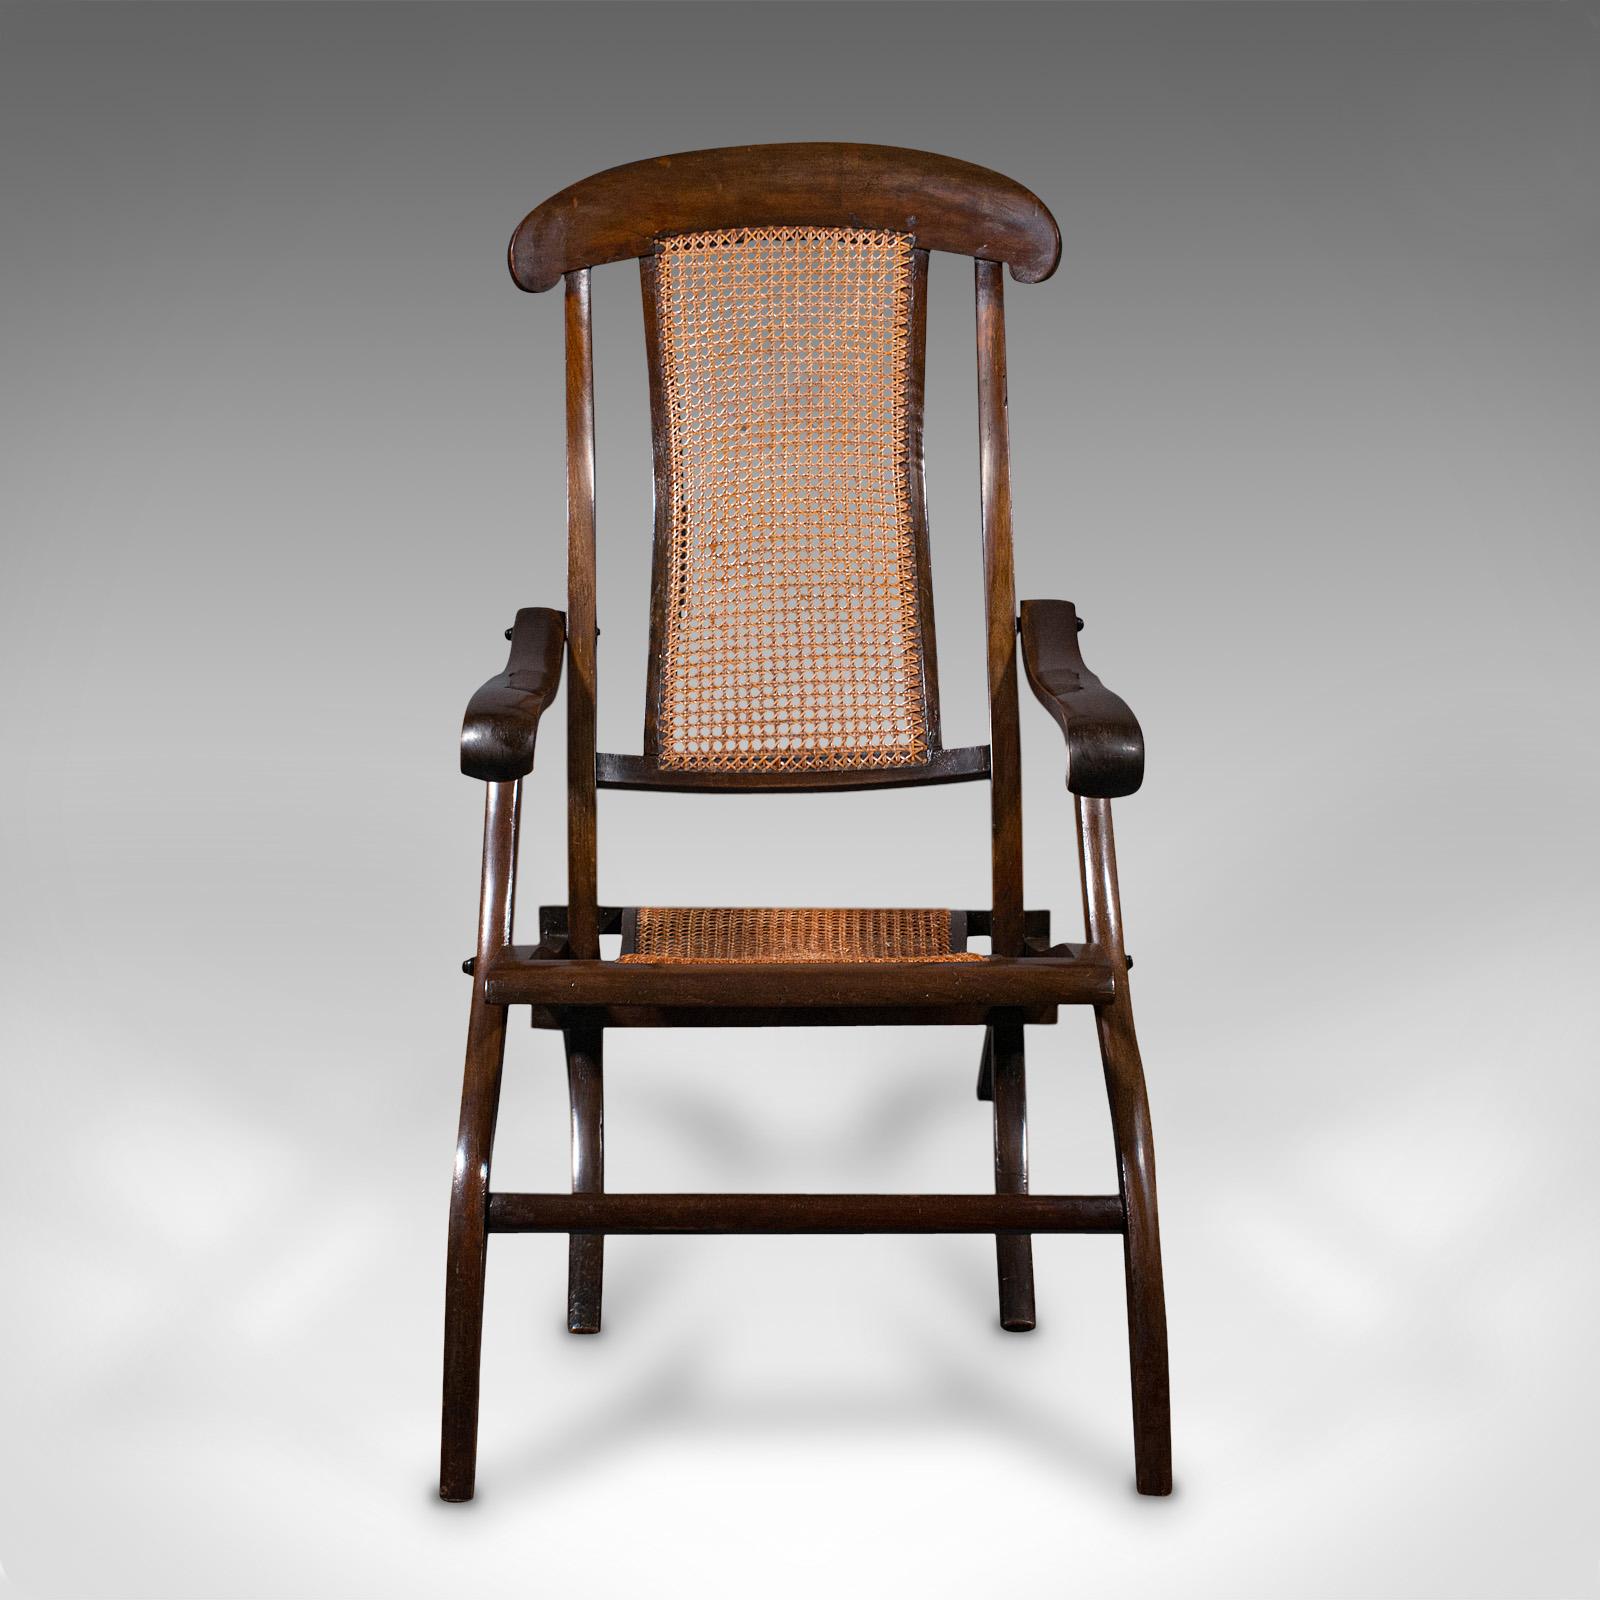 This is an antique steamer deck chair. An English, beech and bergere cane folding armchair or garden lounger, dating to the Edwardian period, circa 1910.

Distinguished form with serpentine, rakish appeal
Displays a desirable aged patina